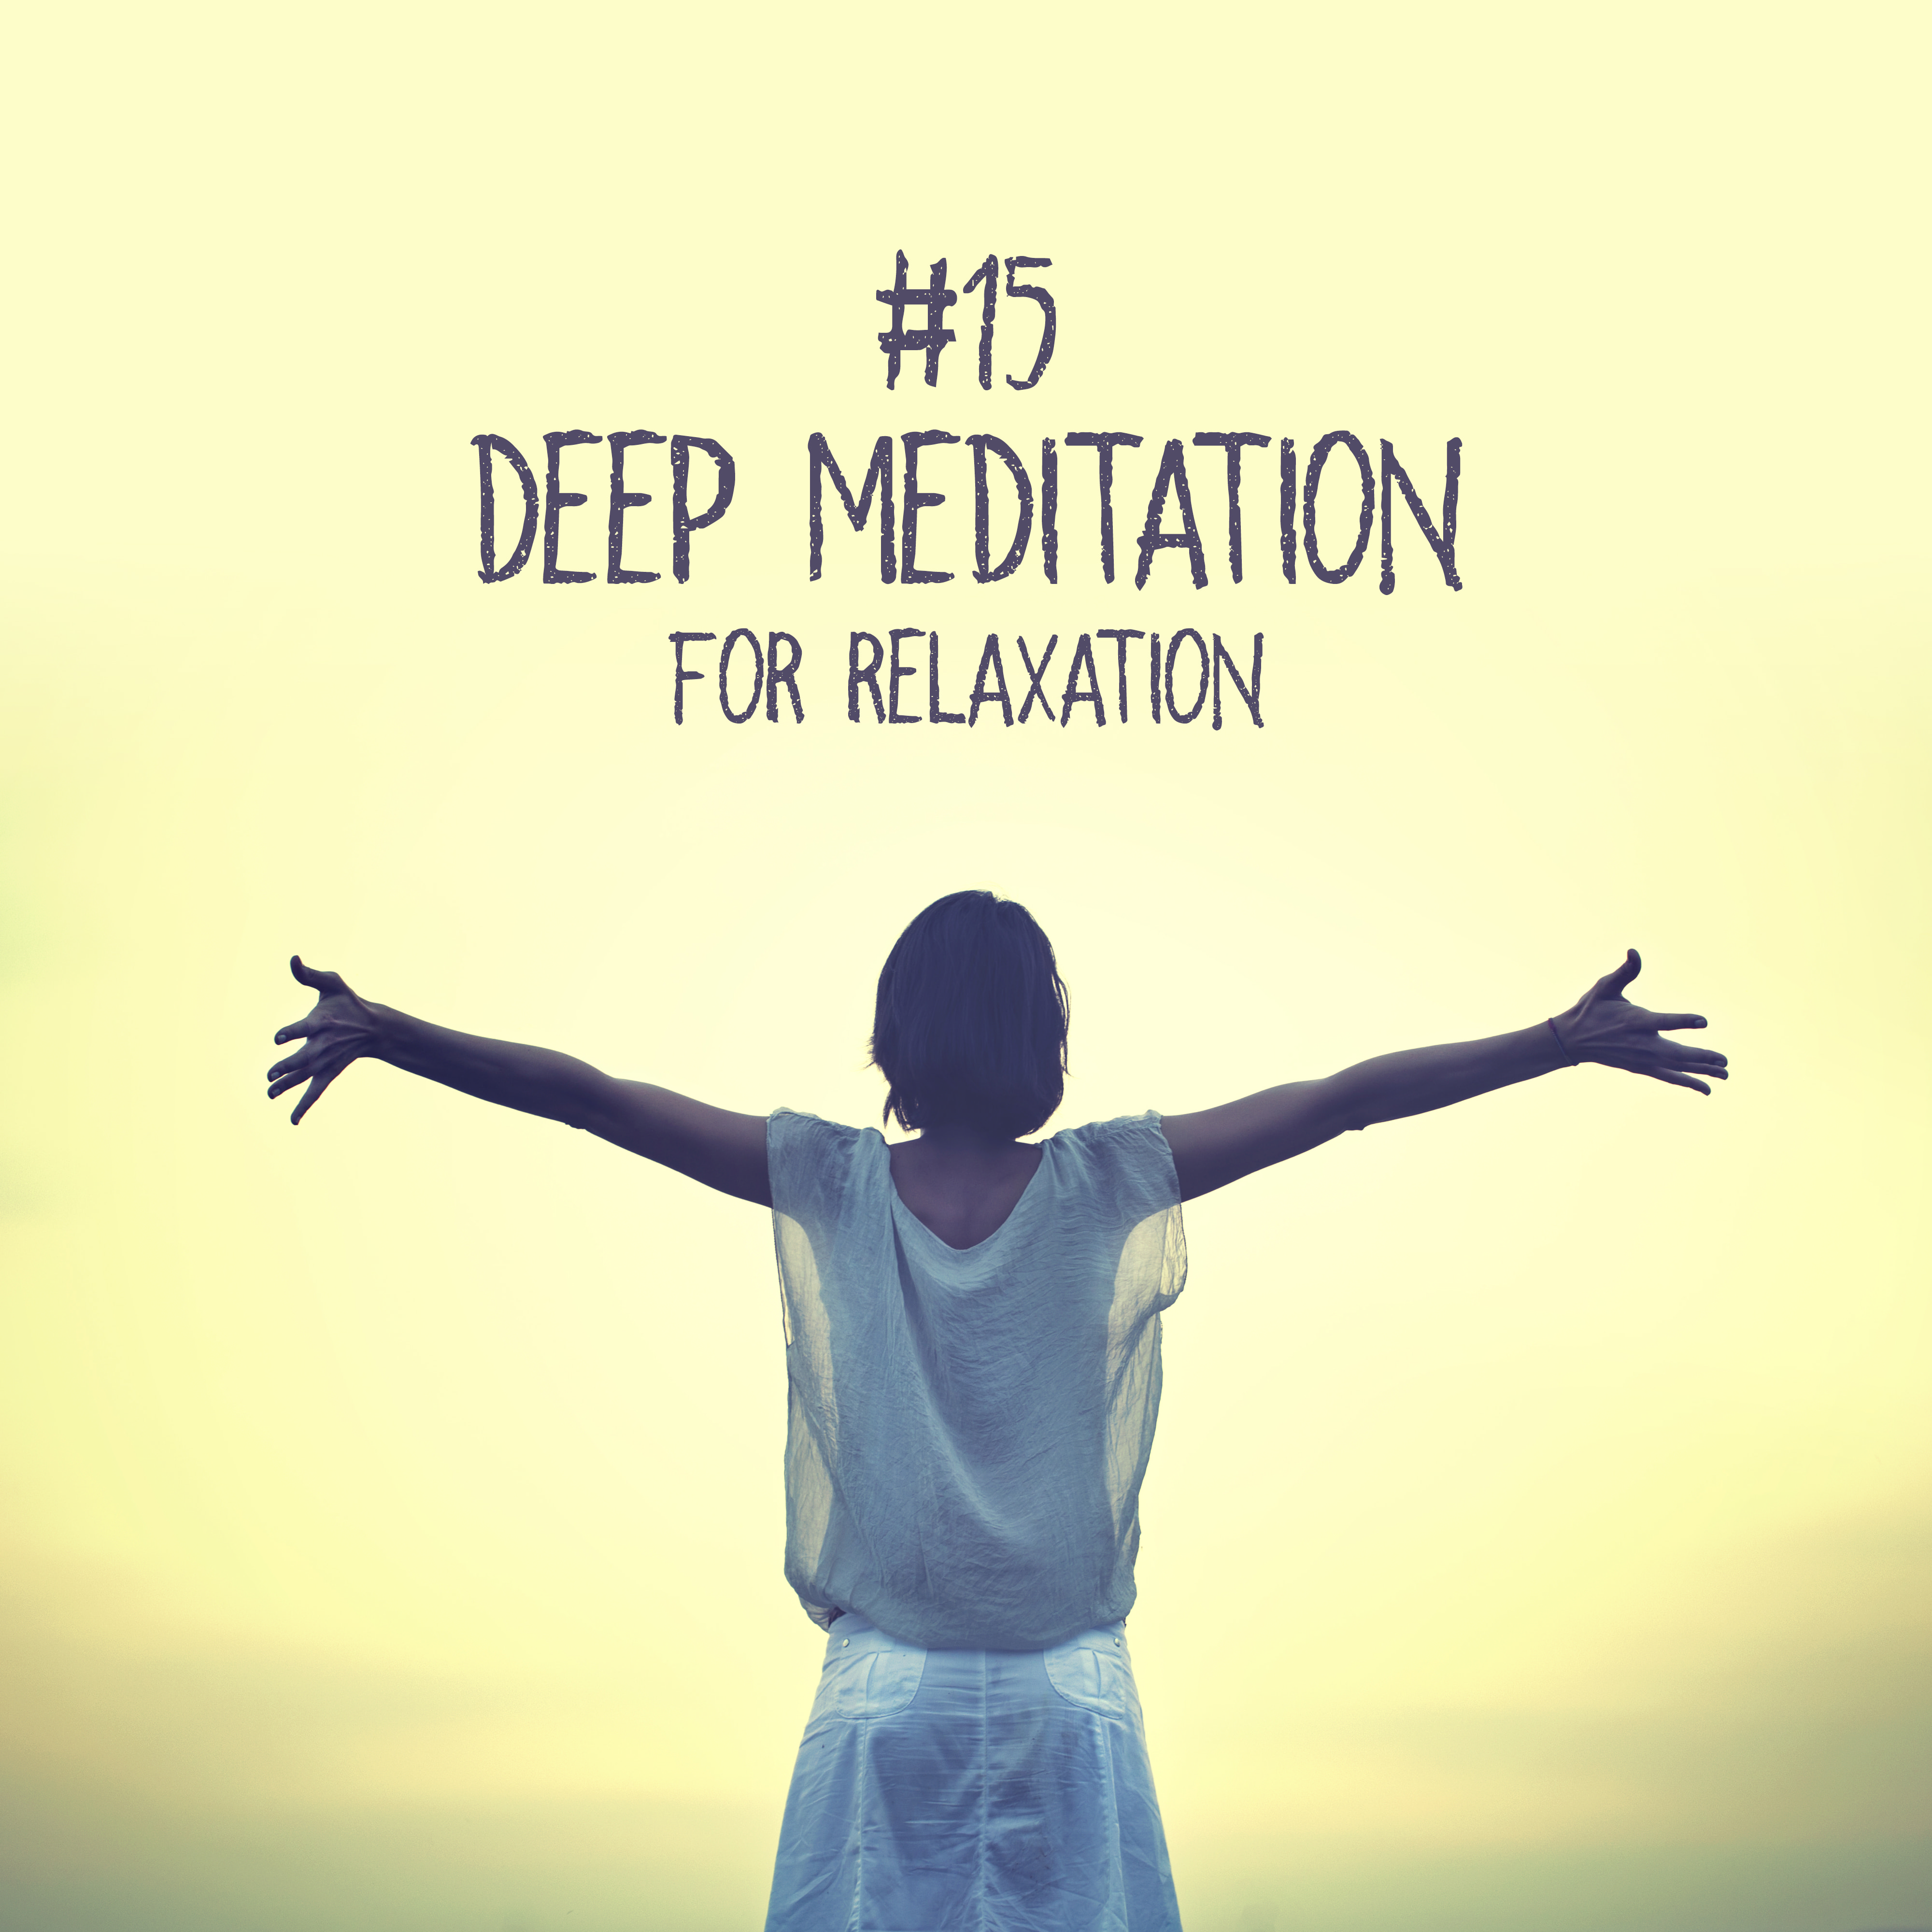 #15 Deep Meditation for Relaxation